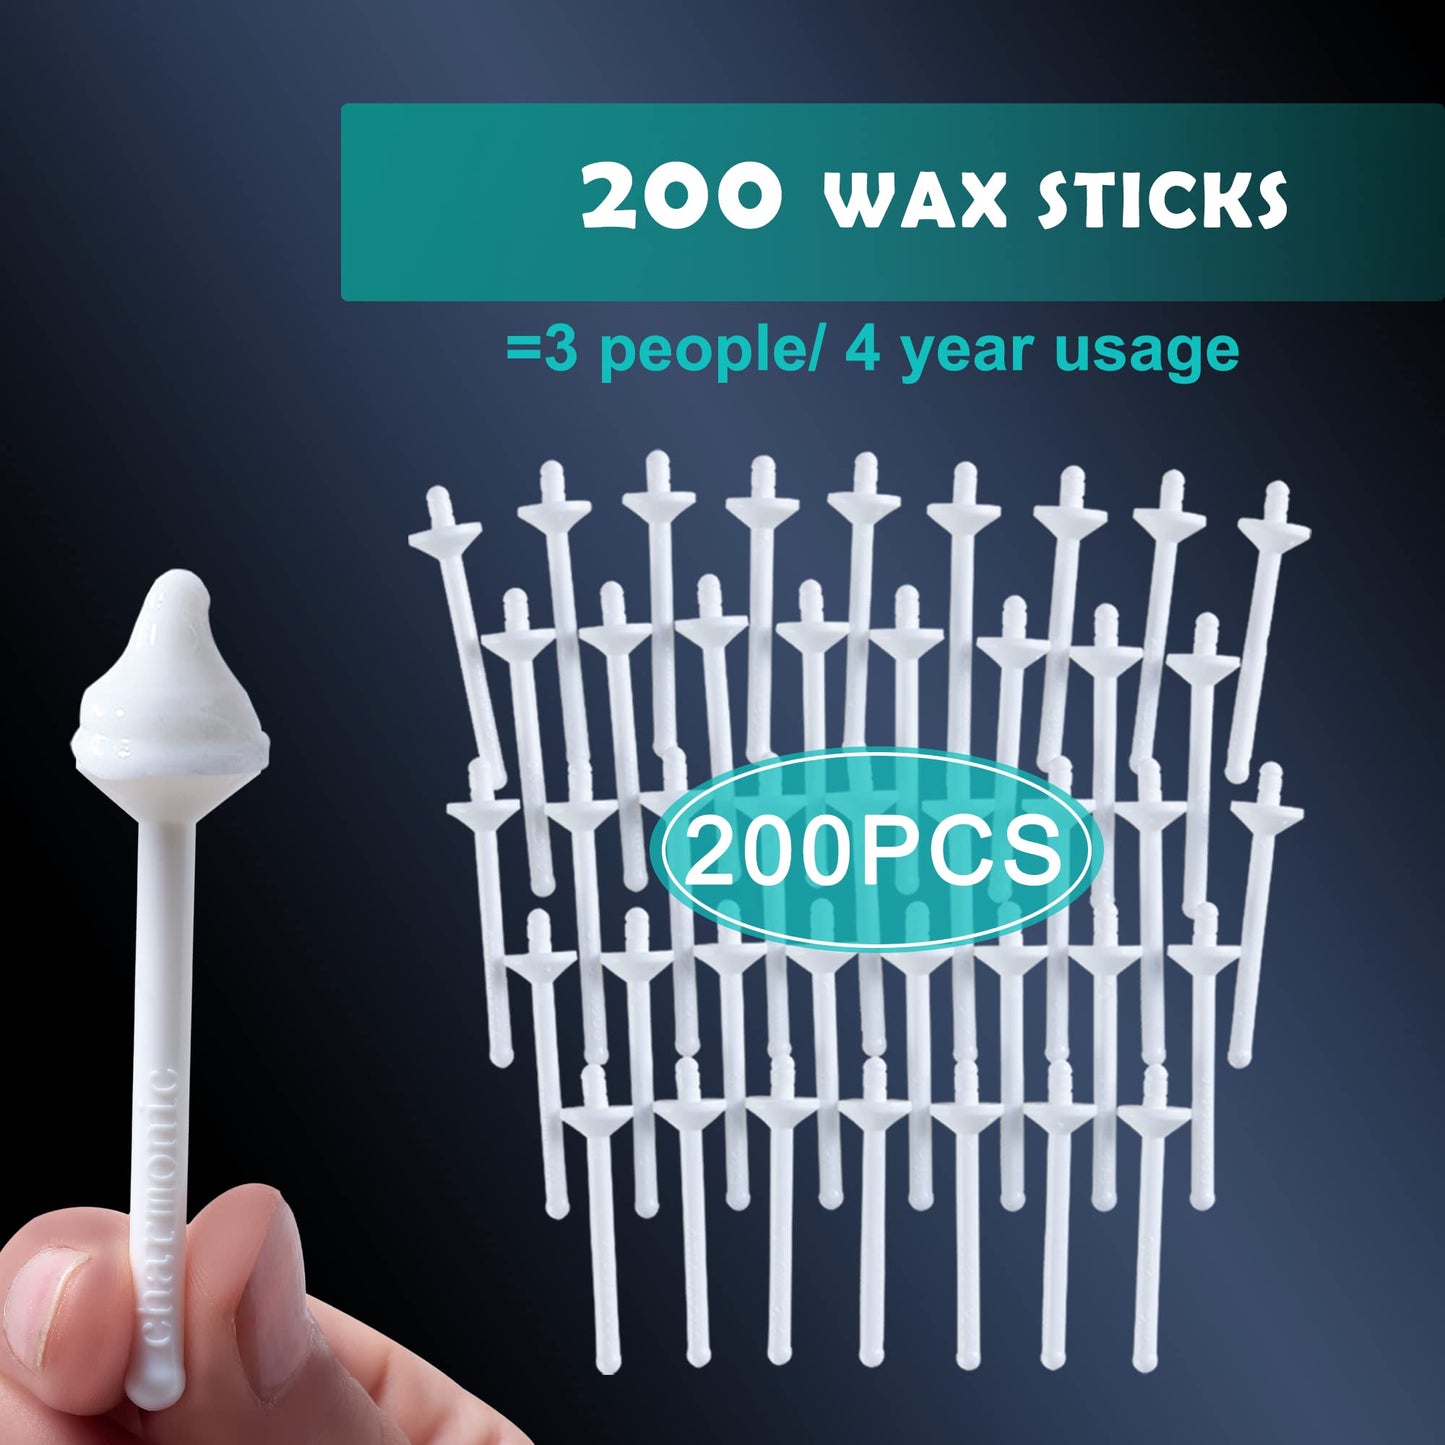 200 Pcs Wax Sticks, Nose Wax Kit Accessories, Waxing Sticks for Nose Hair Remover, Wax Applicator Sticks for Nostril Nasal Cleaning Ear Face Eyebrows Hair Removal for Men Women